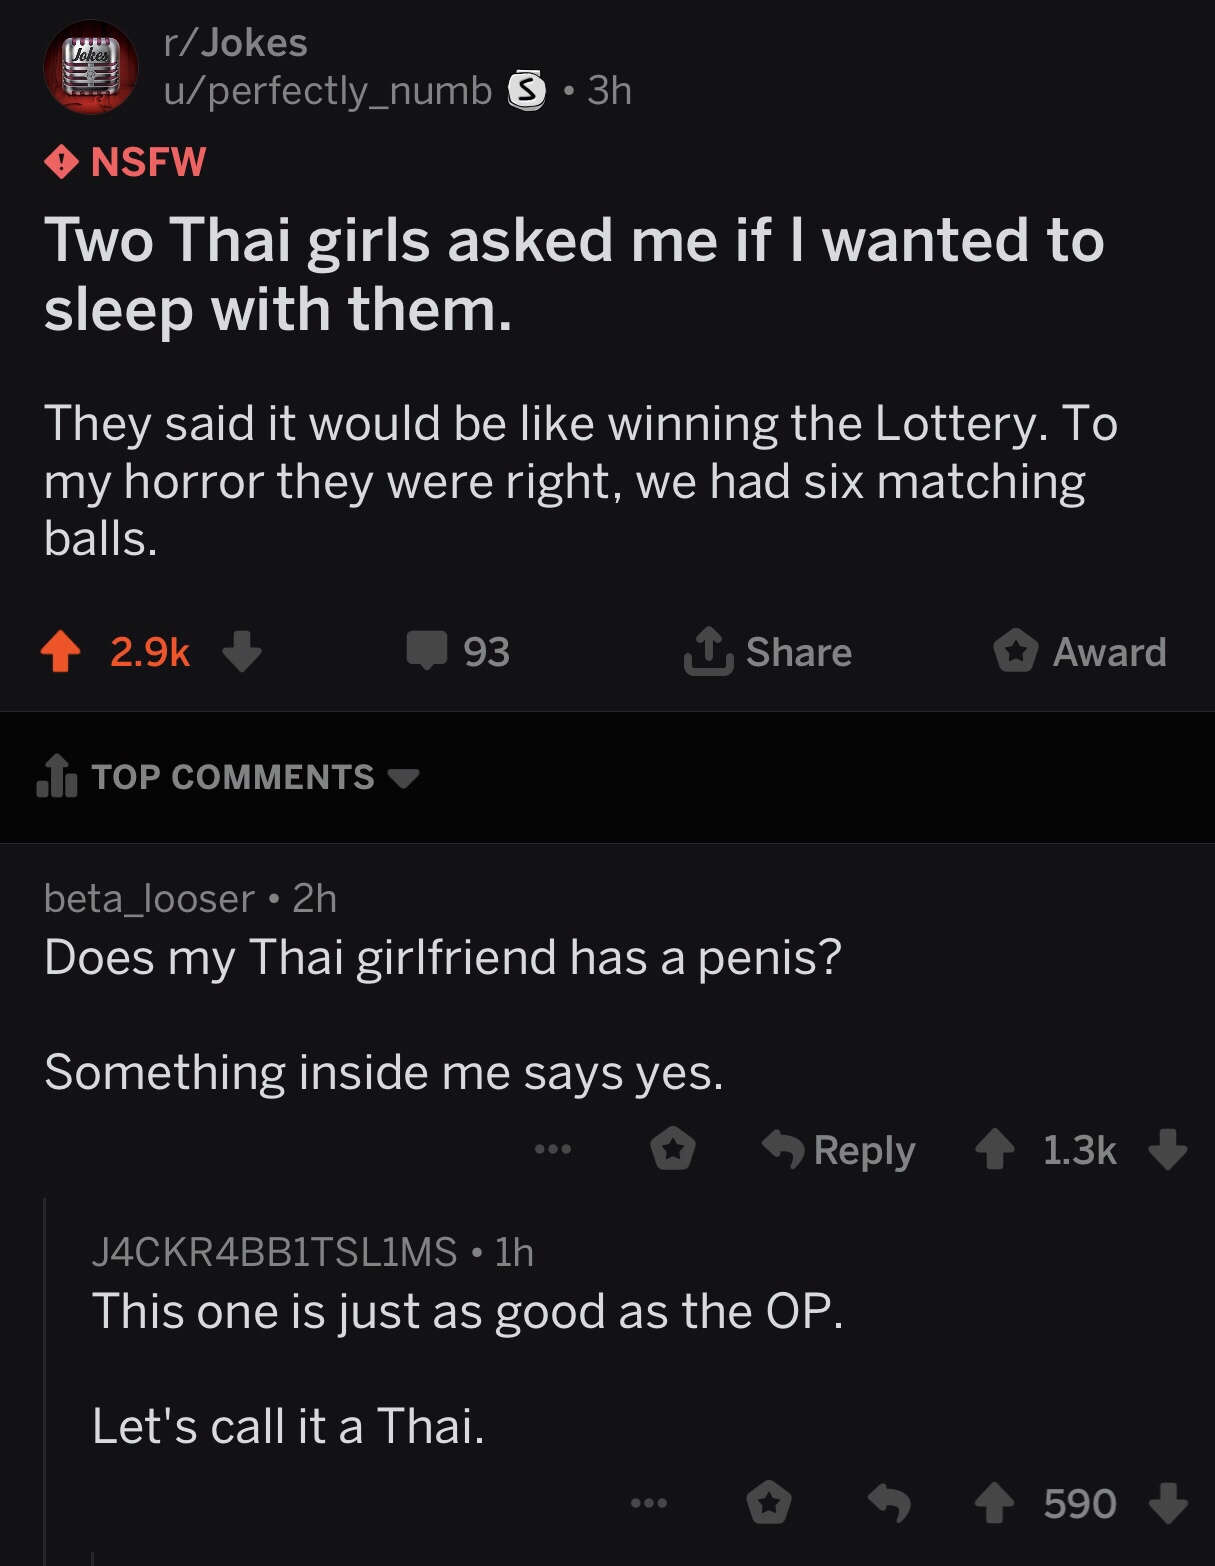 screenshot - rJokes uperfectly_numb 5 3h Nsfw Two Thai girls asked me if I wanted to sleep with them. They said it would be winning the Lottery. To my horror they were right, we had six matching balls. 93 Award 1. Top beta_looser 2h Does my Thai girlfrien